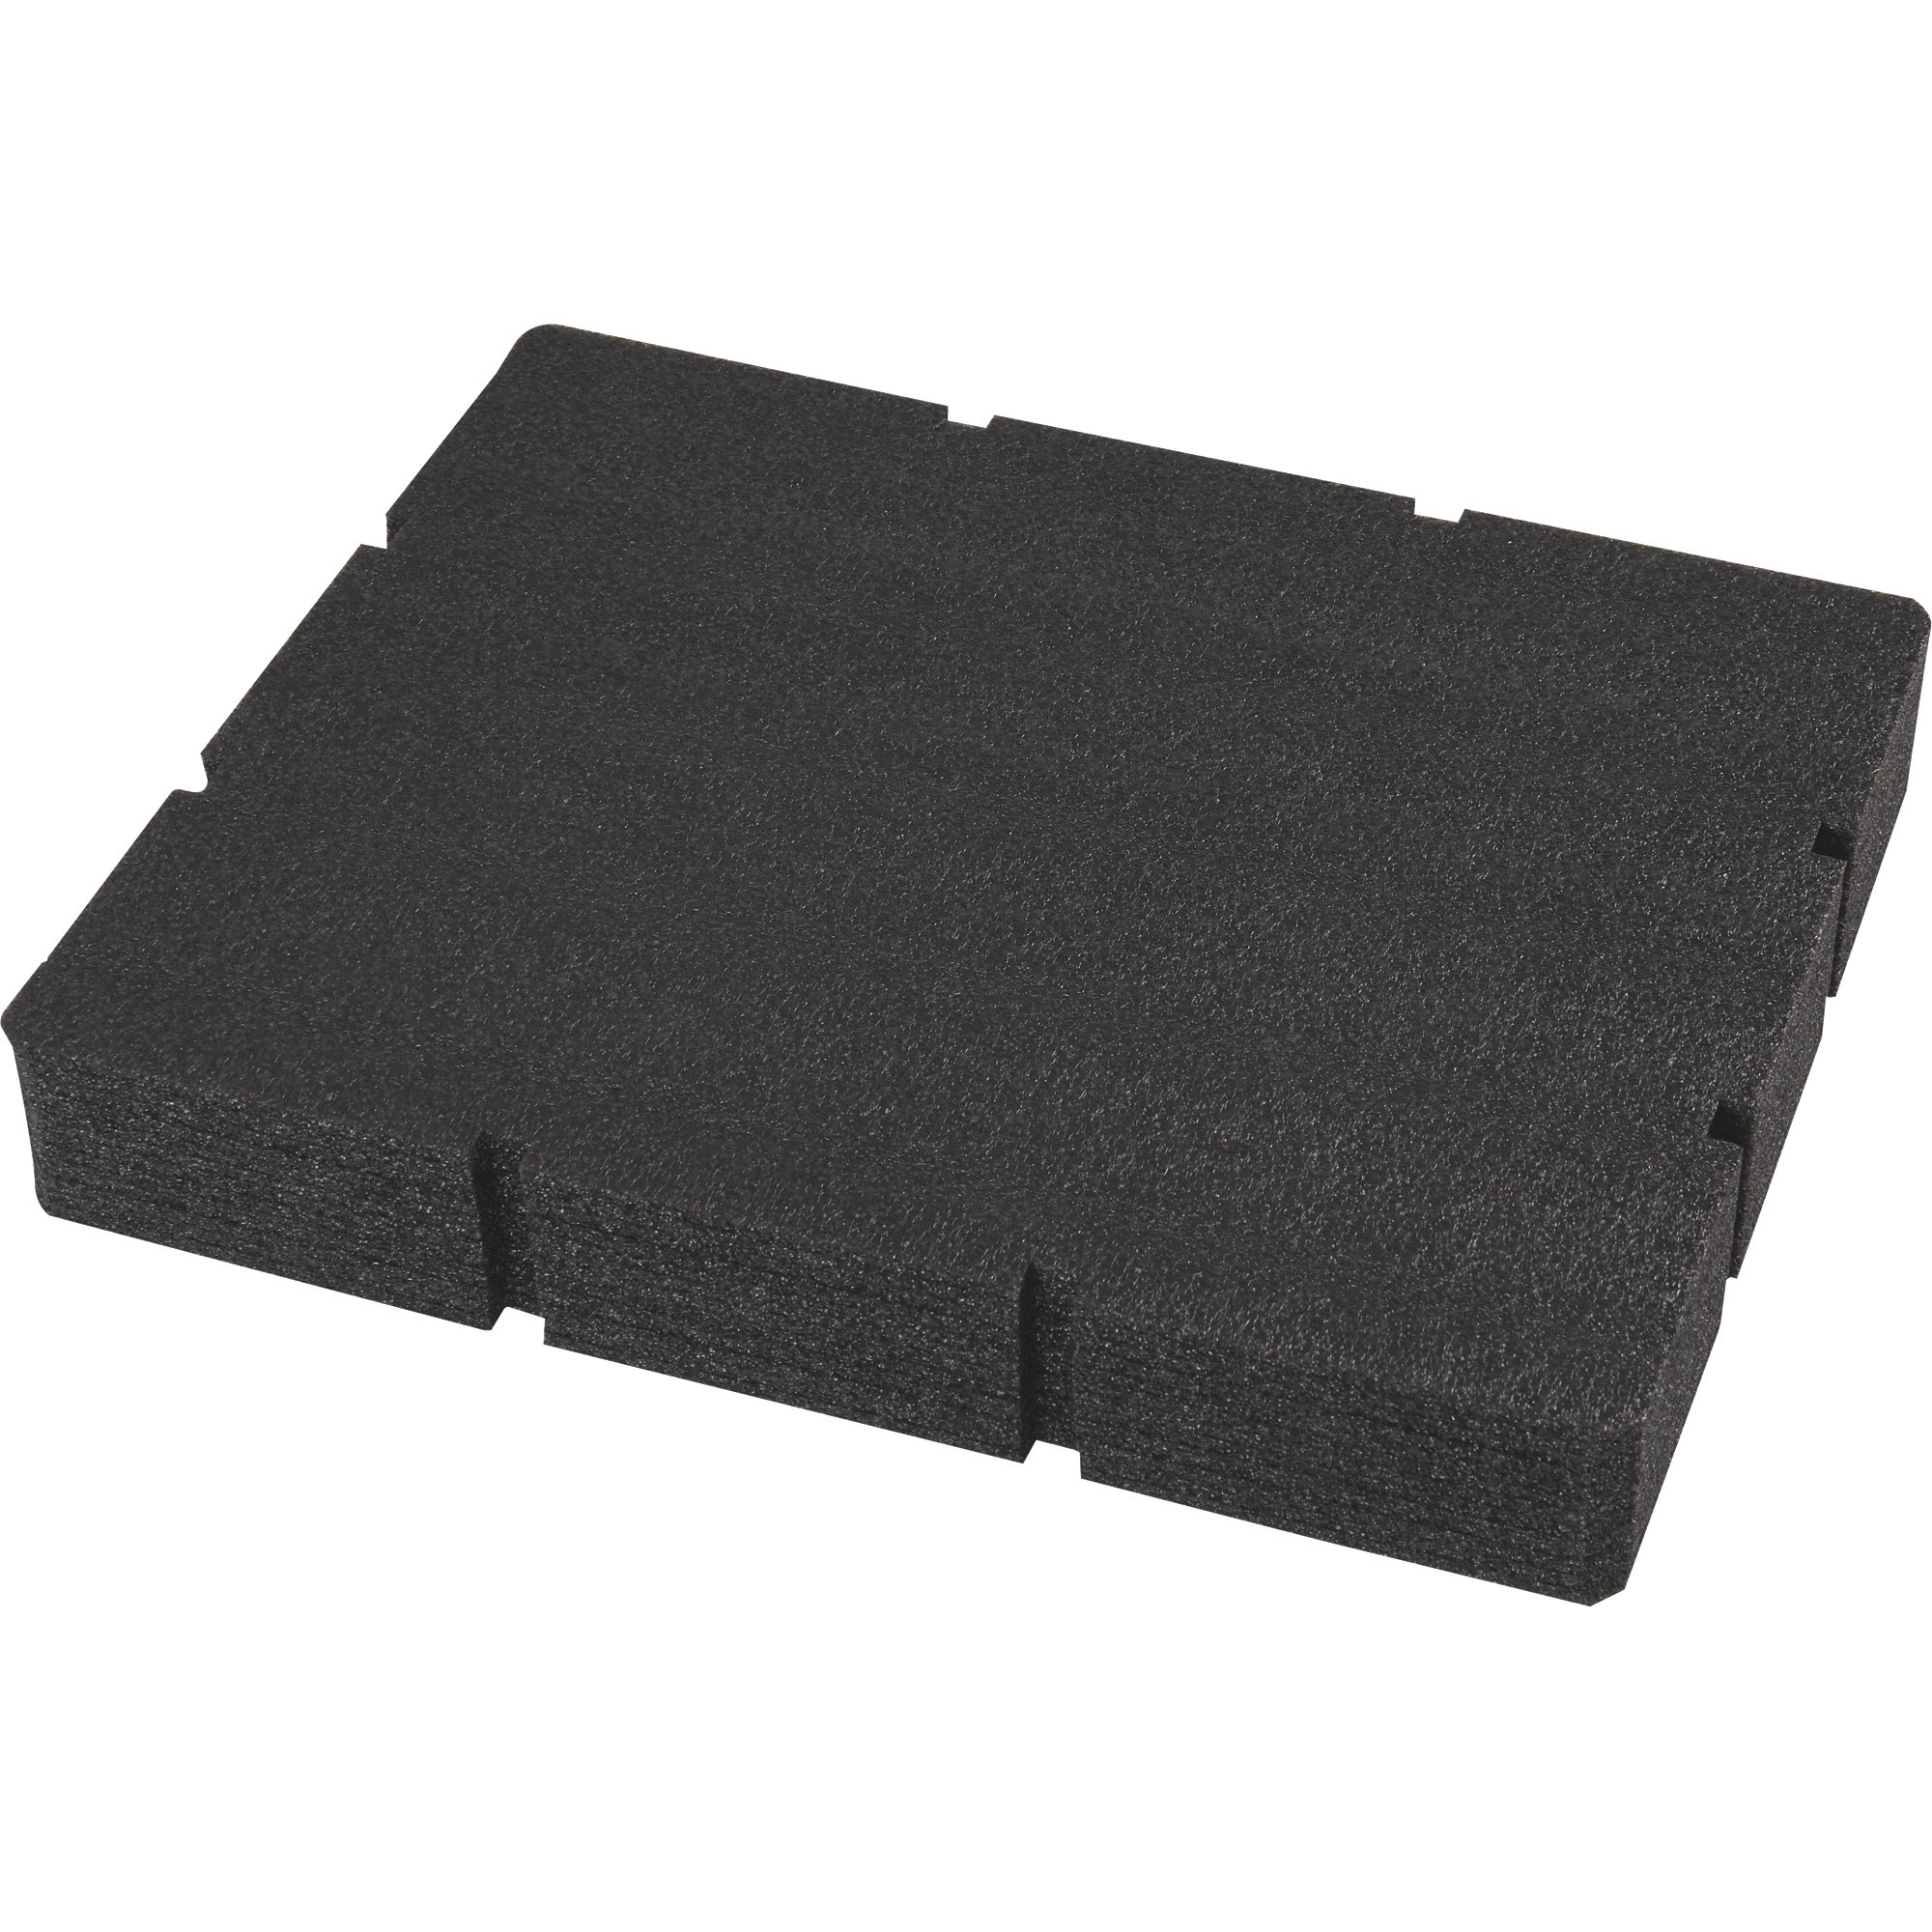 Milwaukee Customizable Foam Insert for Packout Drawer Tool Boxes, 12.5Inch L x 16.3Inch W x 4.8Inch H, Model 48-22-8452